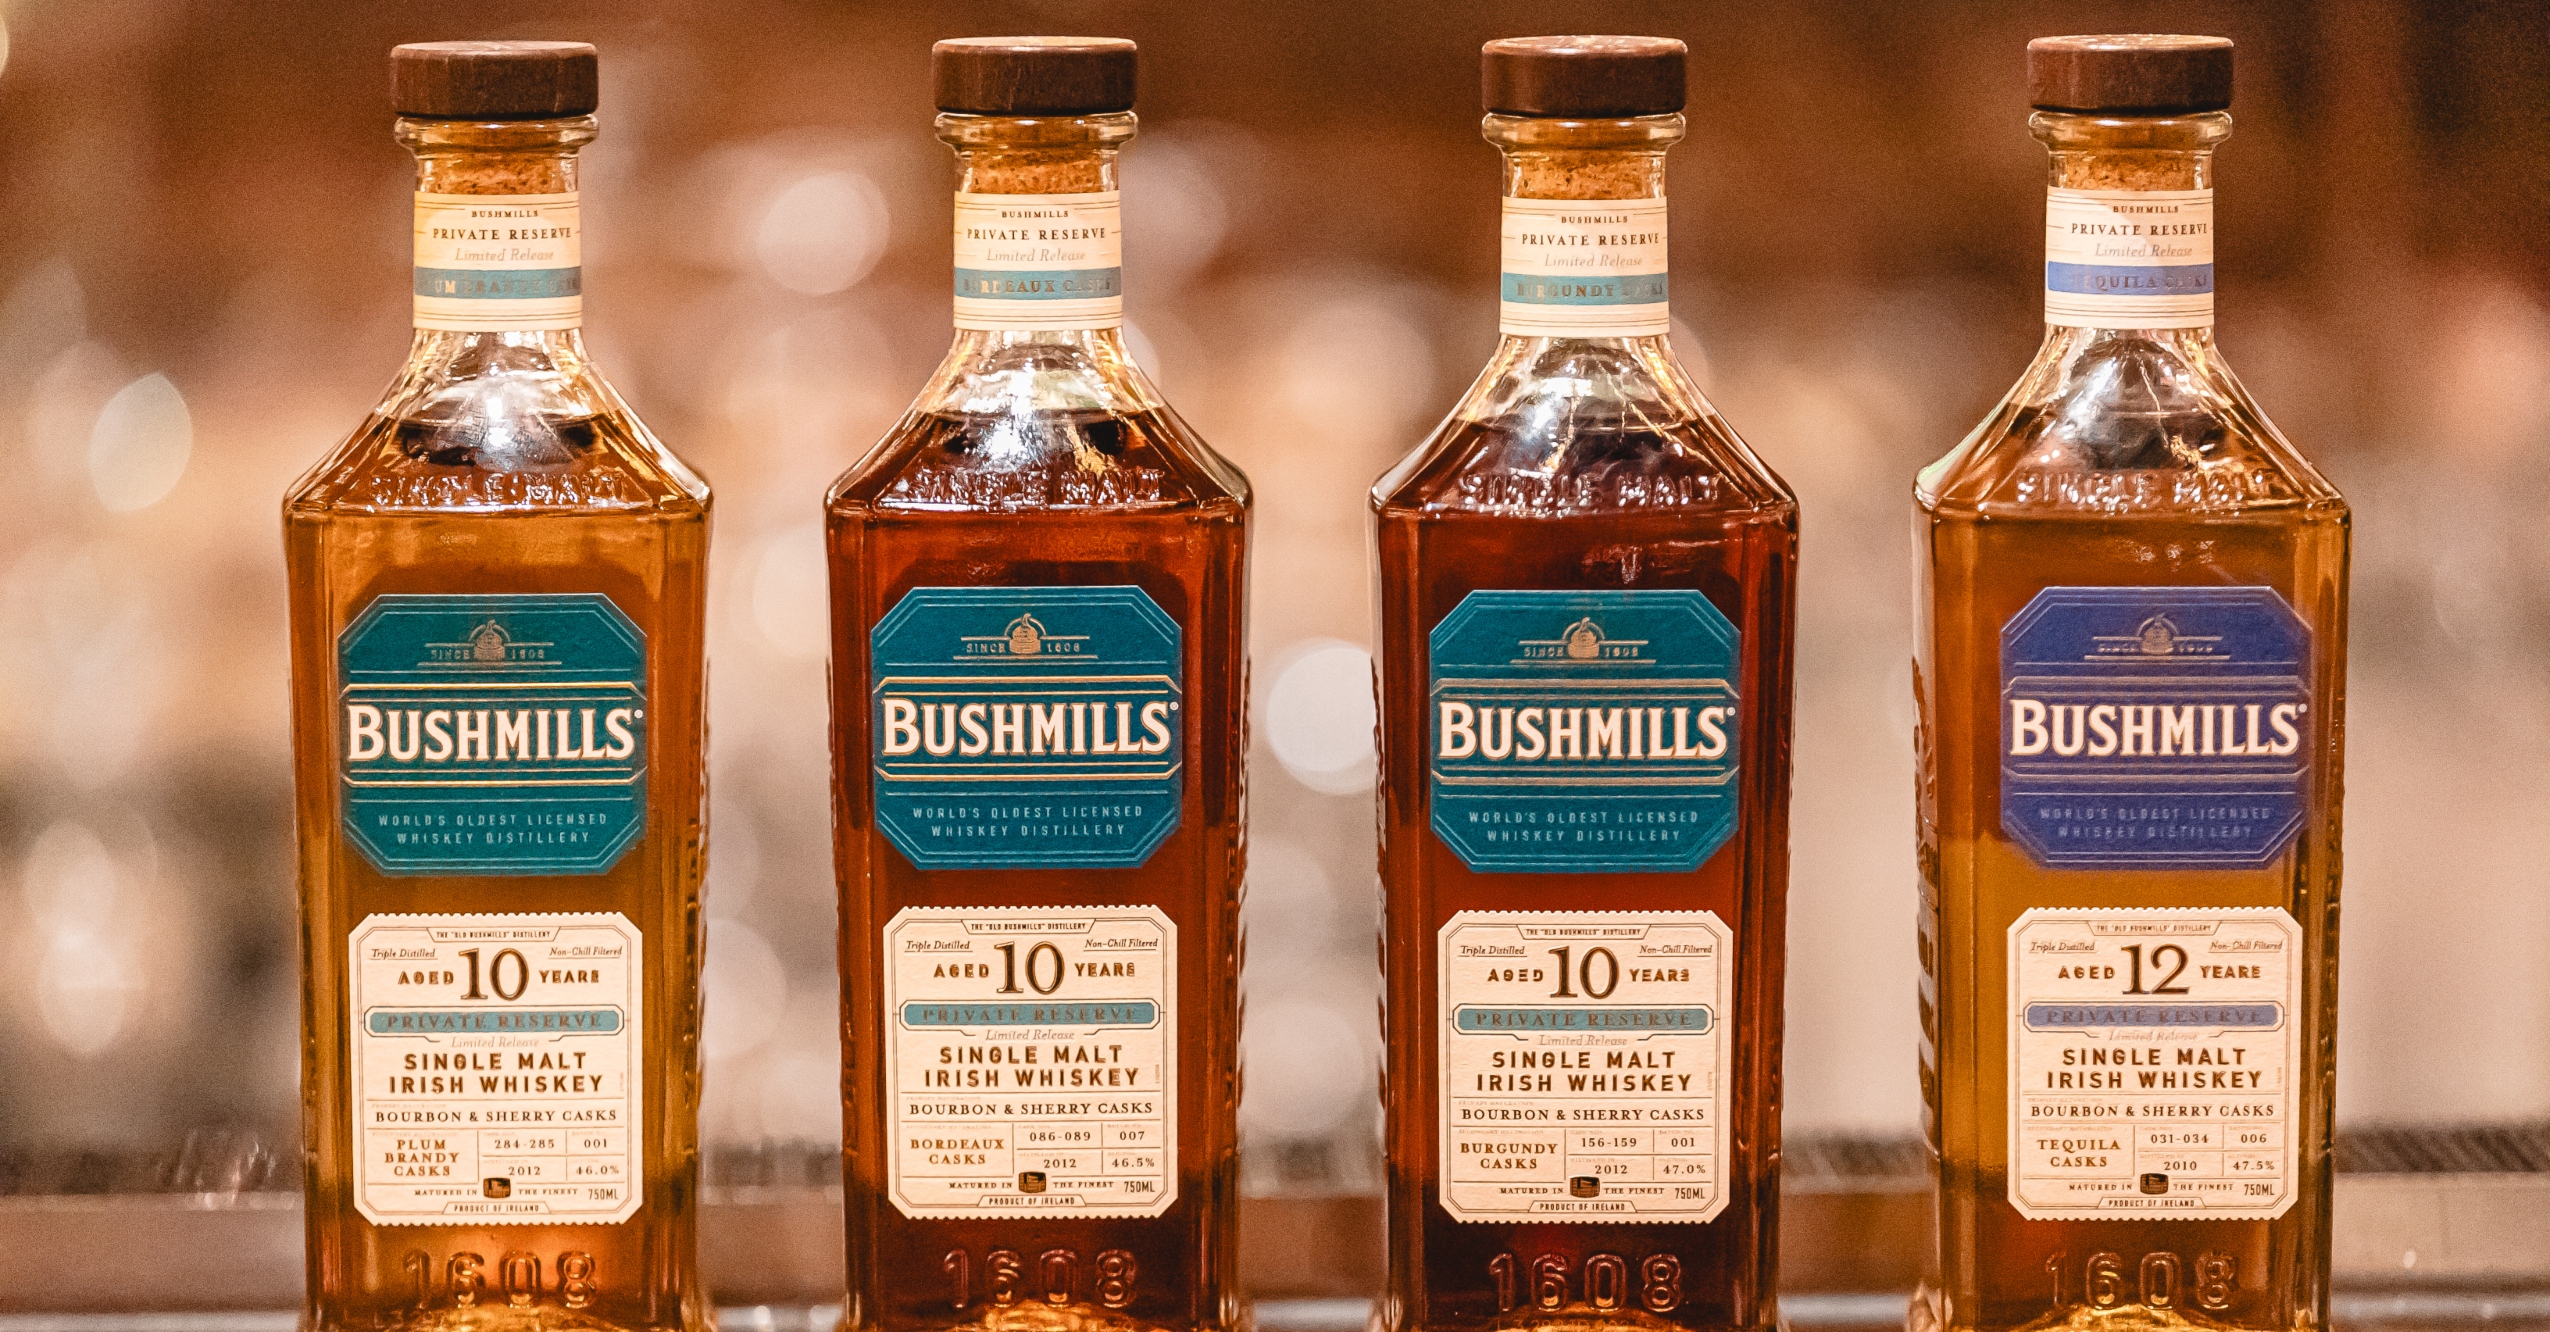 Bushmills Private Reserve Collection Features 4 Rare Cask-Finished Irish Whiskeys